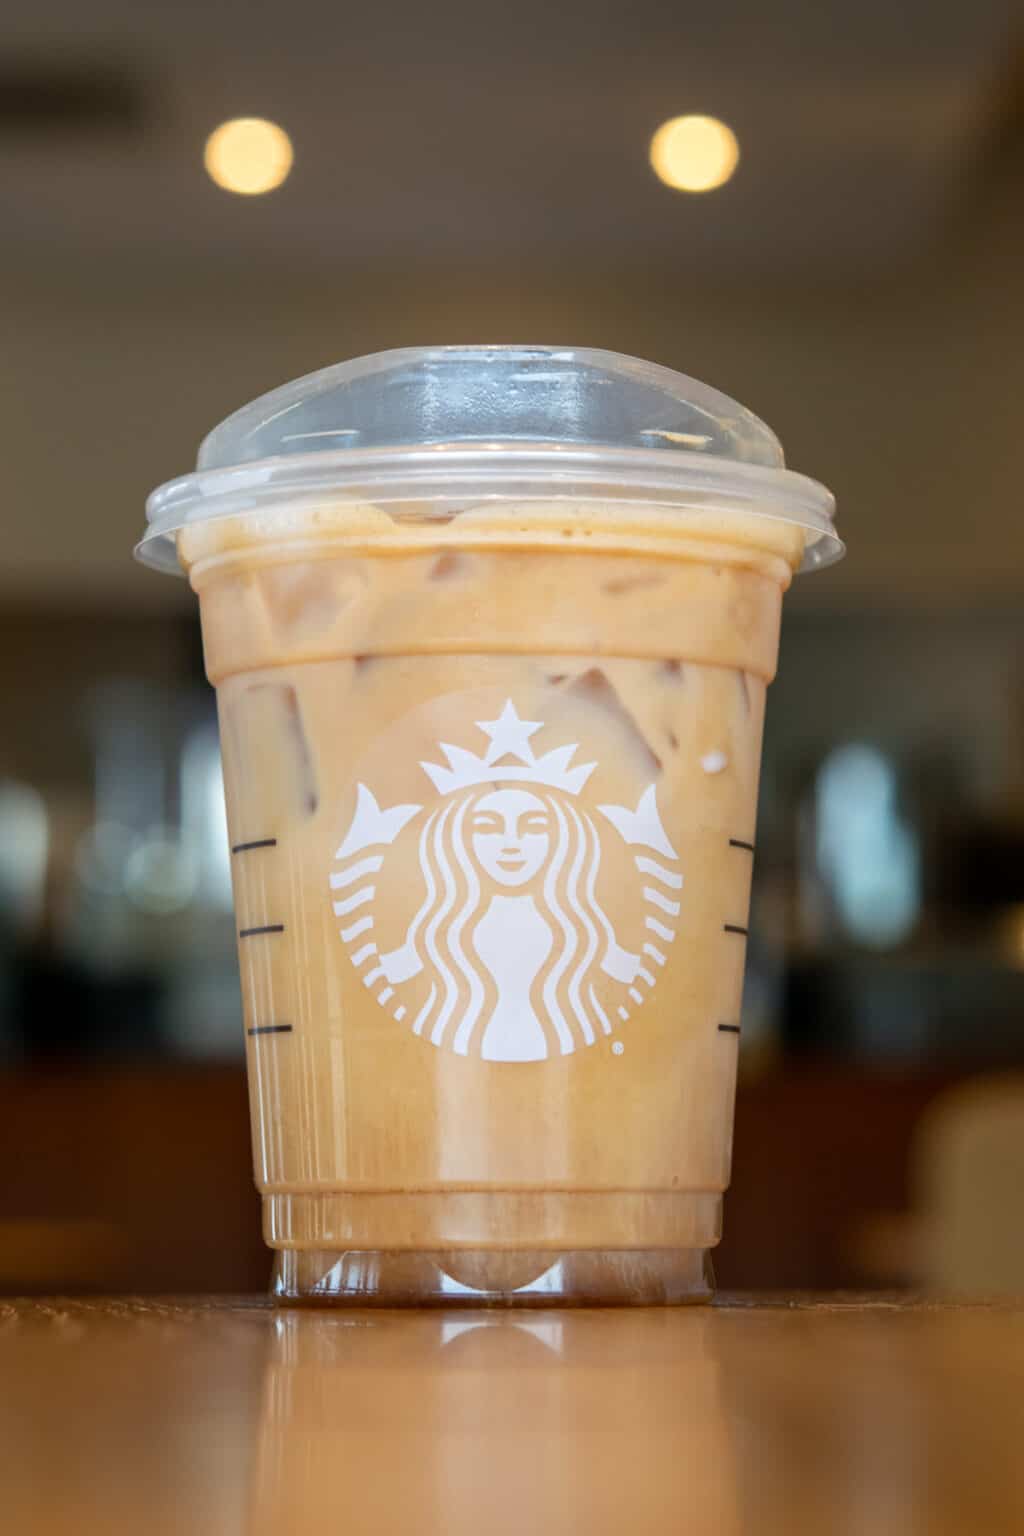 12 Types of Starbucks Iced Coffee Drinks on the Menu » Grounds to Brew